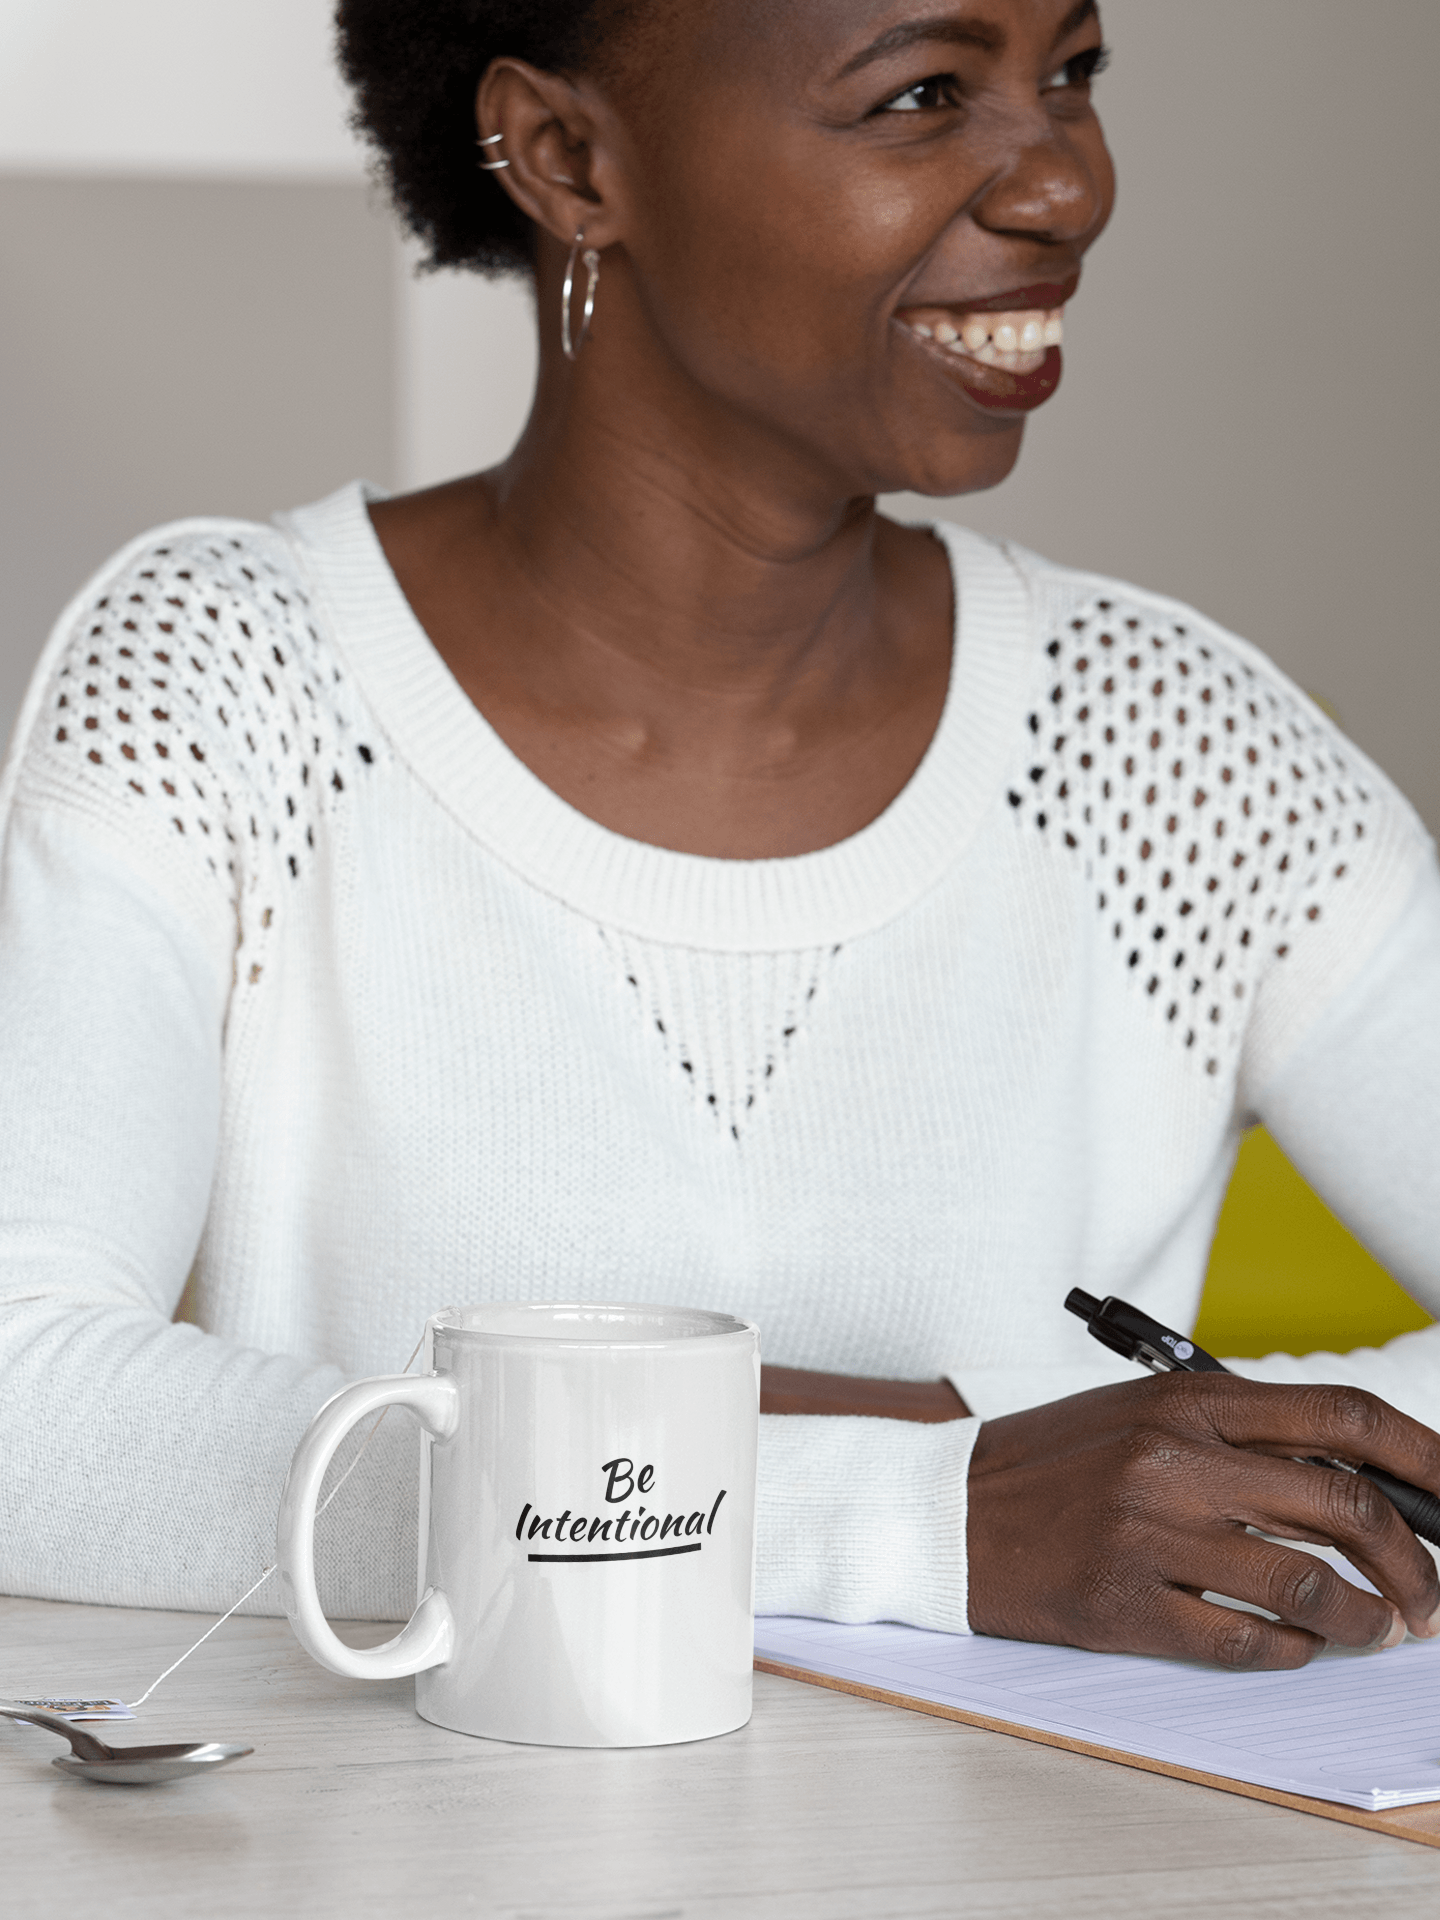 African American woman with Be Intentional Mug by CP Designs Unlimited